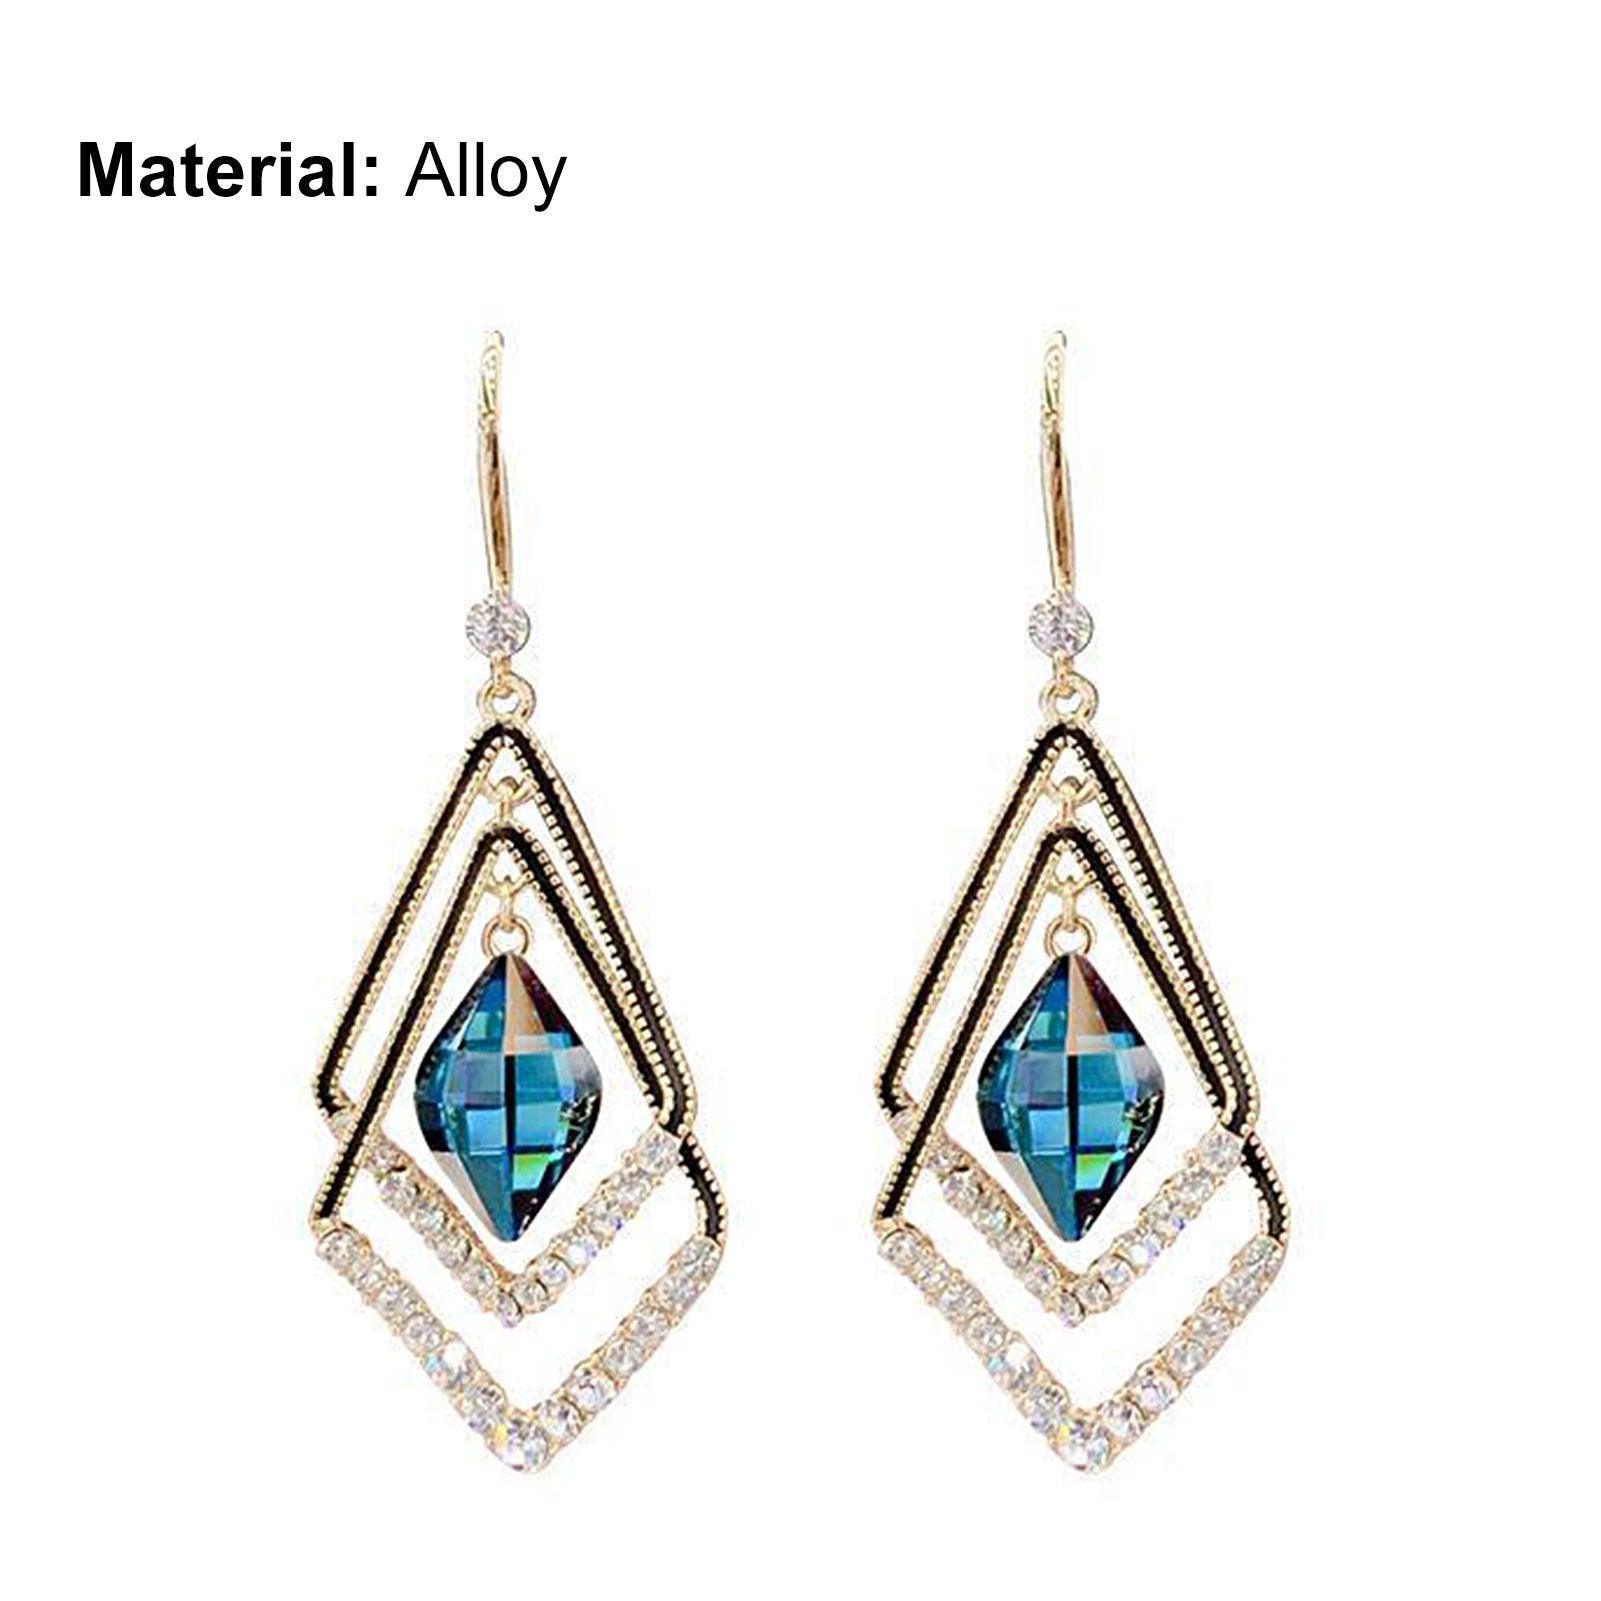 Double Layer Rhombus Rhinestones Jewelry Sparkling Electroplated Hook Earrings-Blue - SayToLove